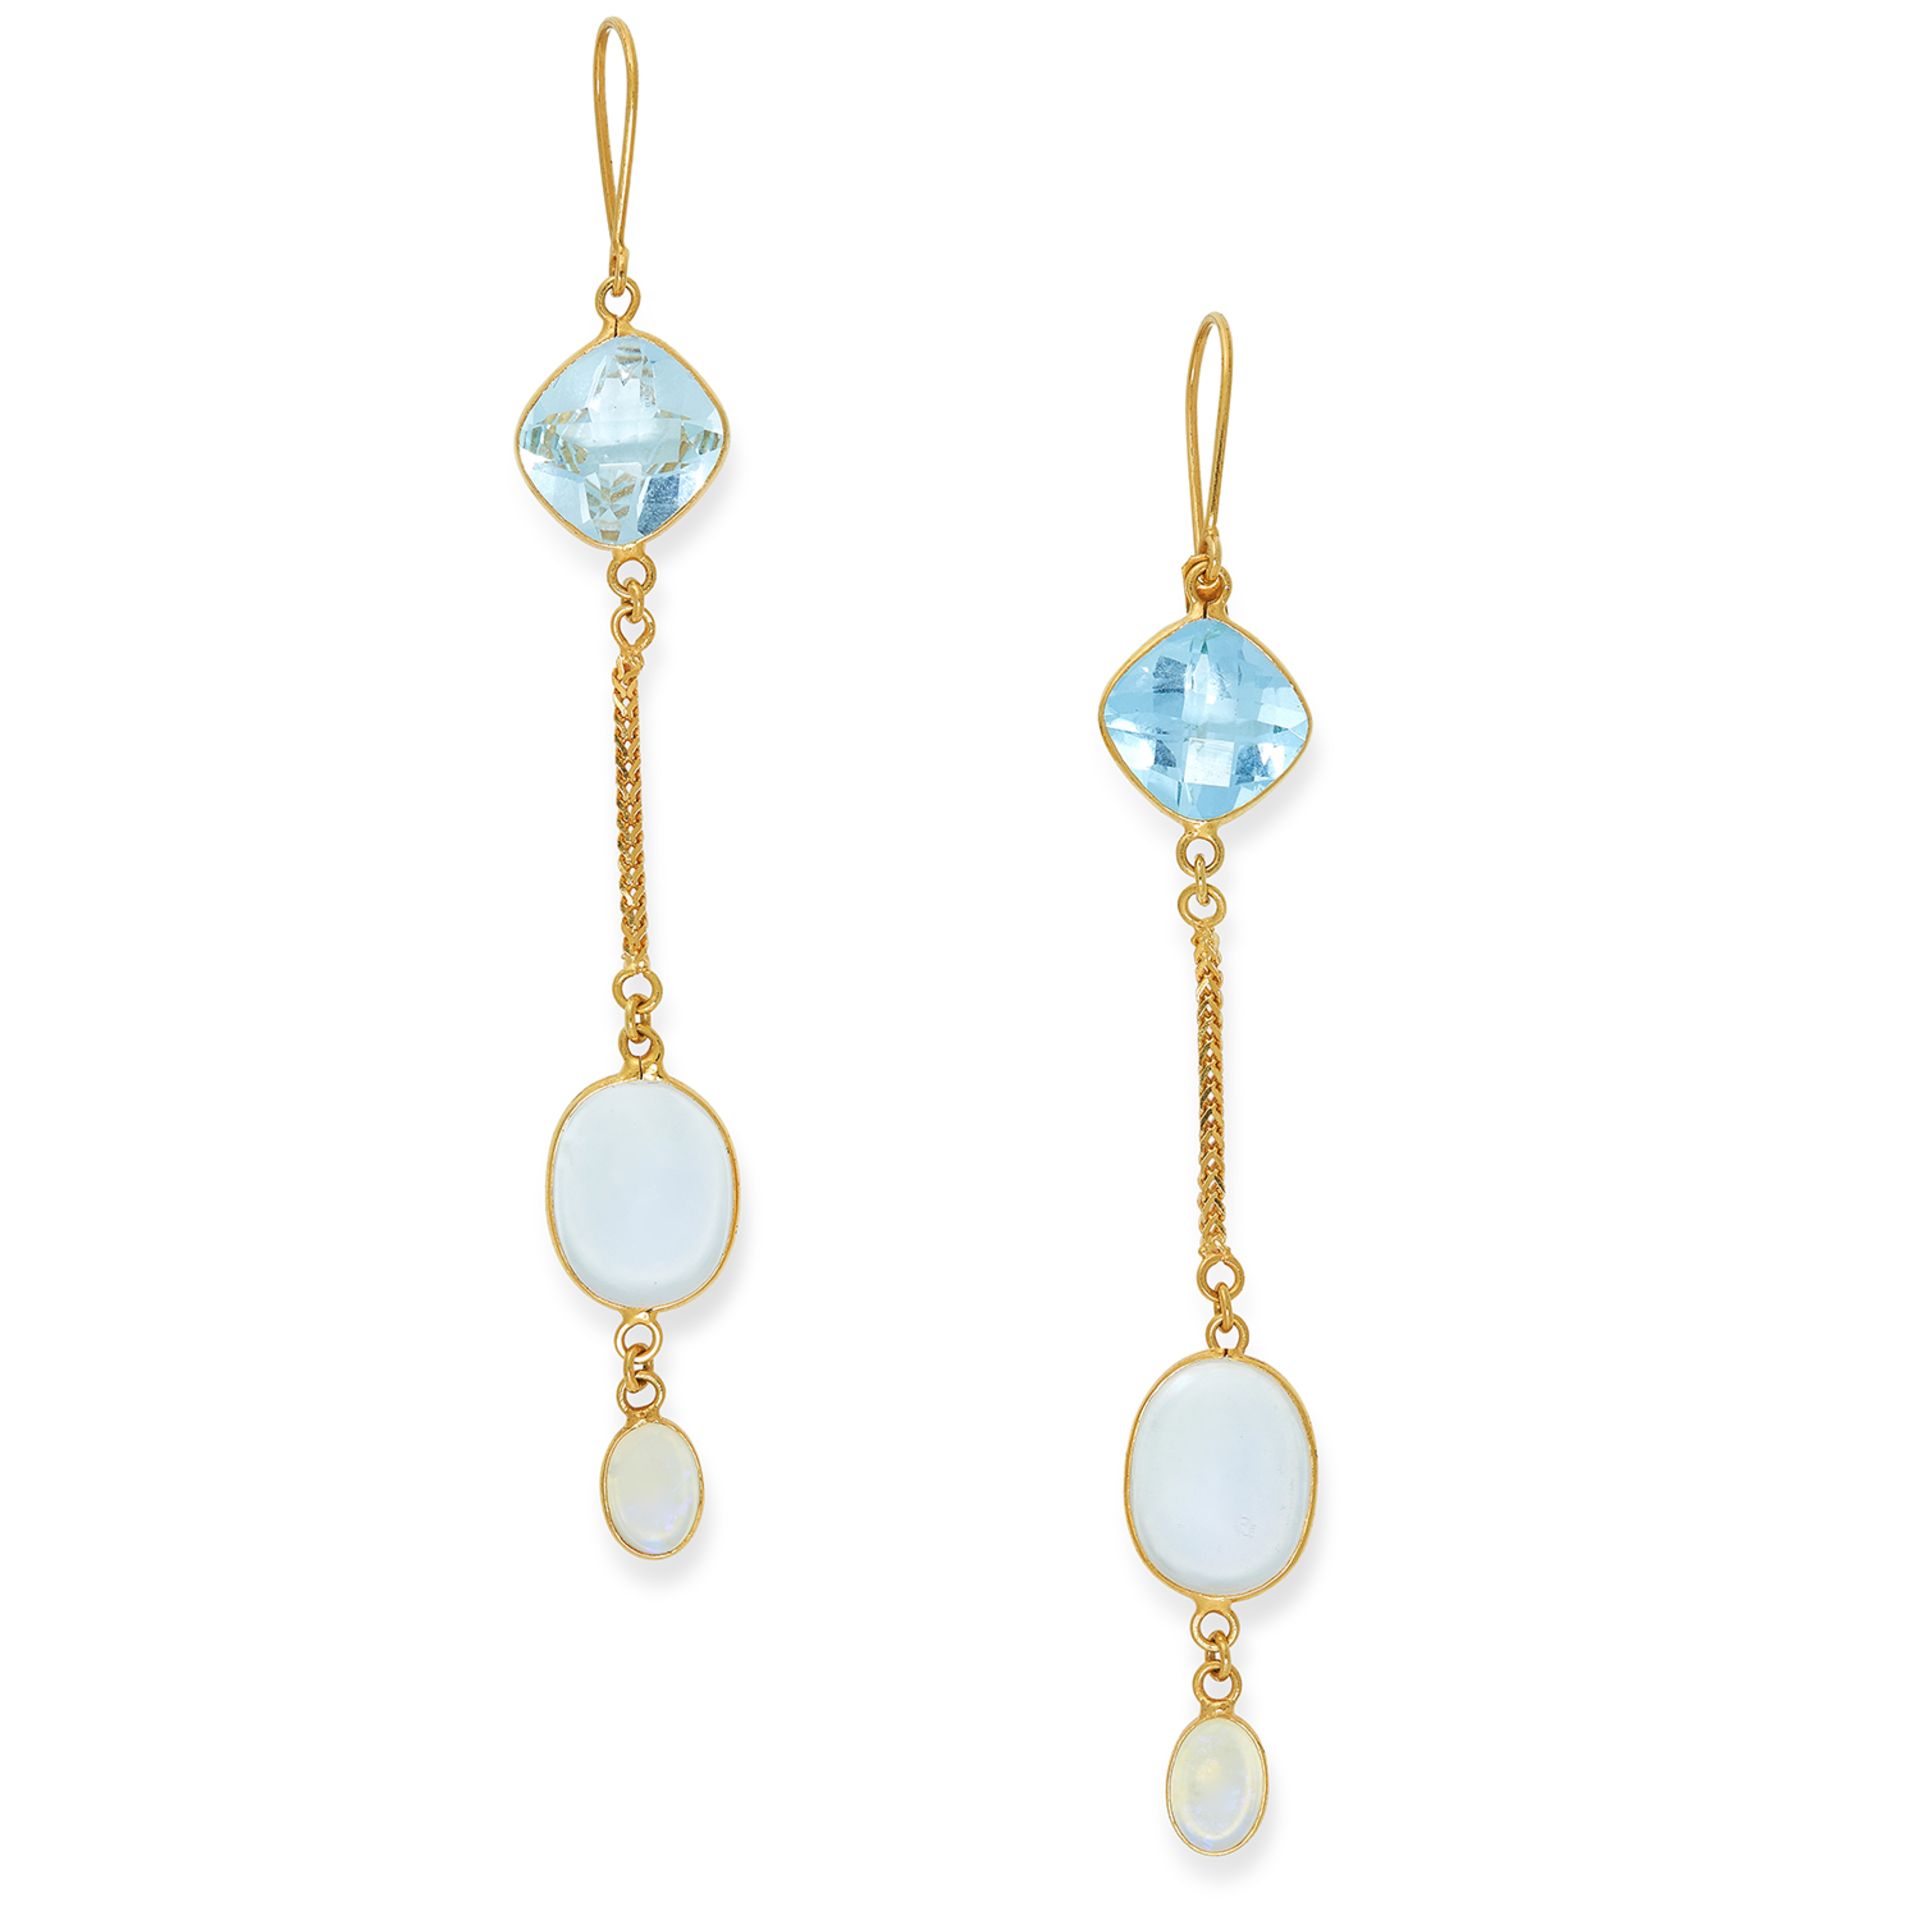 BLUE TOPAZ, MOONSTONE AND OPAL DROP EARRINGS set with a fancy cut blue topaz, a cabochon moonstone